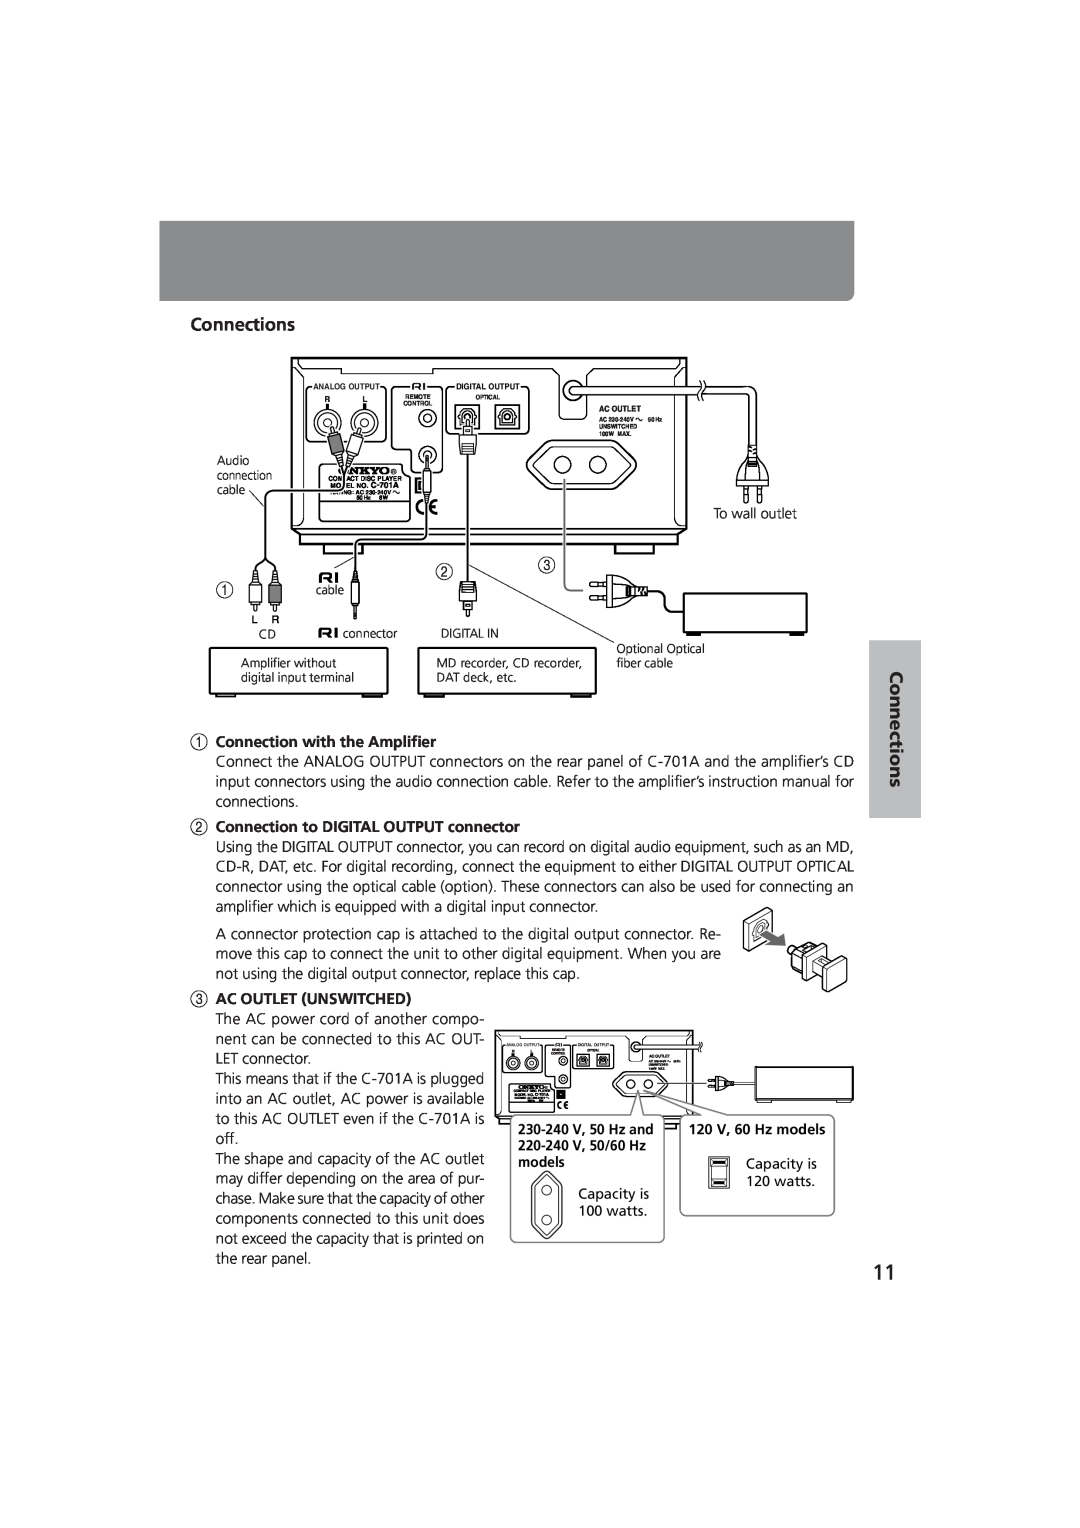 Onkyo C-701A Operations, Other Information, 1Connection with the Amplifier, 2Connection to DIGITAL OUTPUT connector, watts 